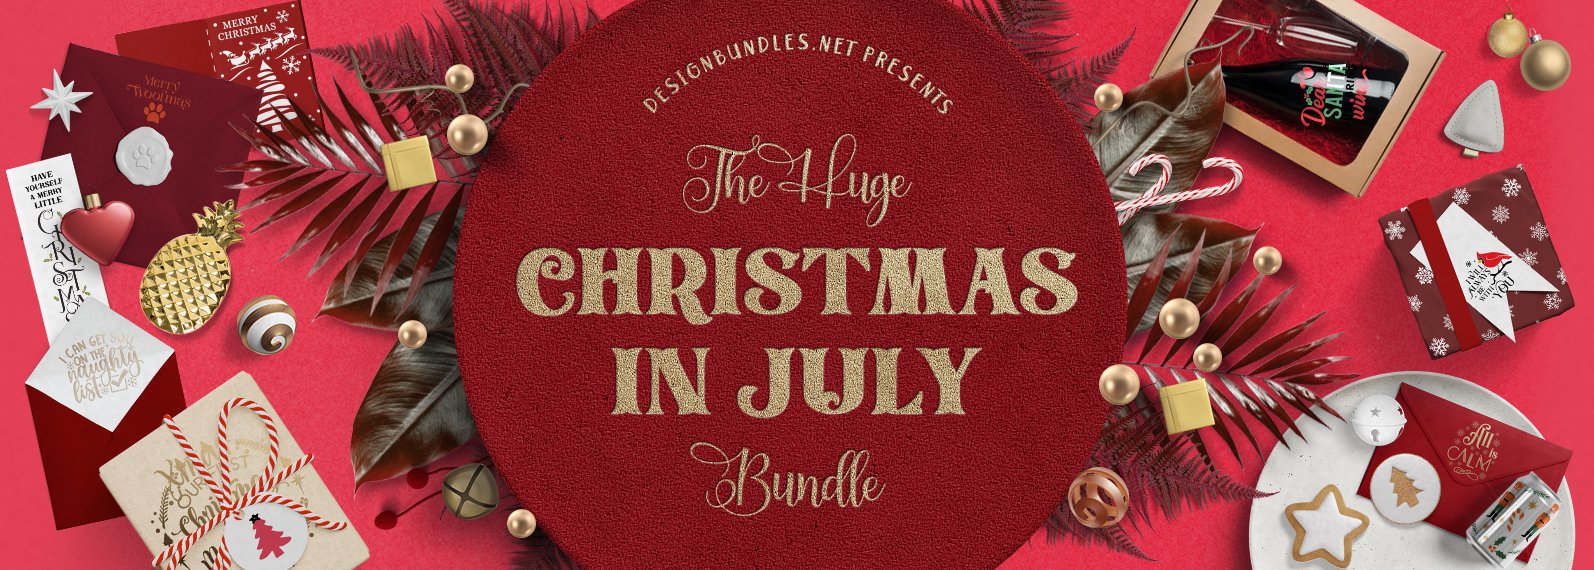 The Huge Christmas In July Bundle Cover